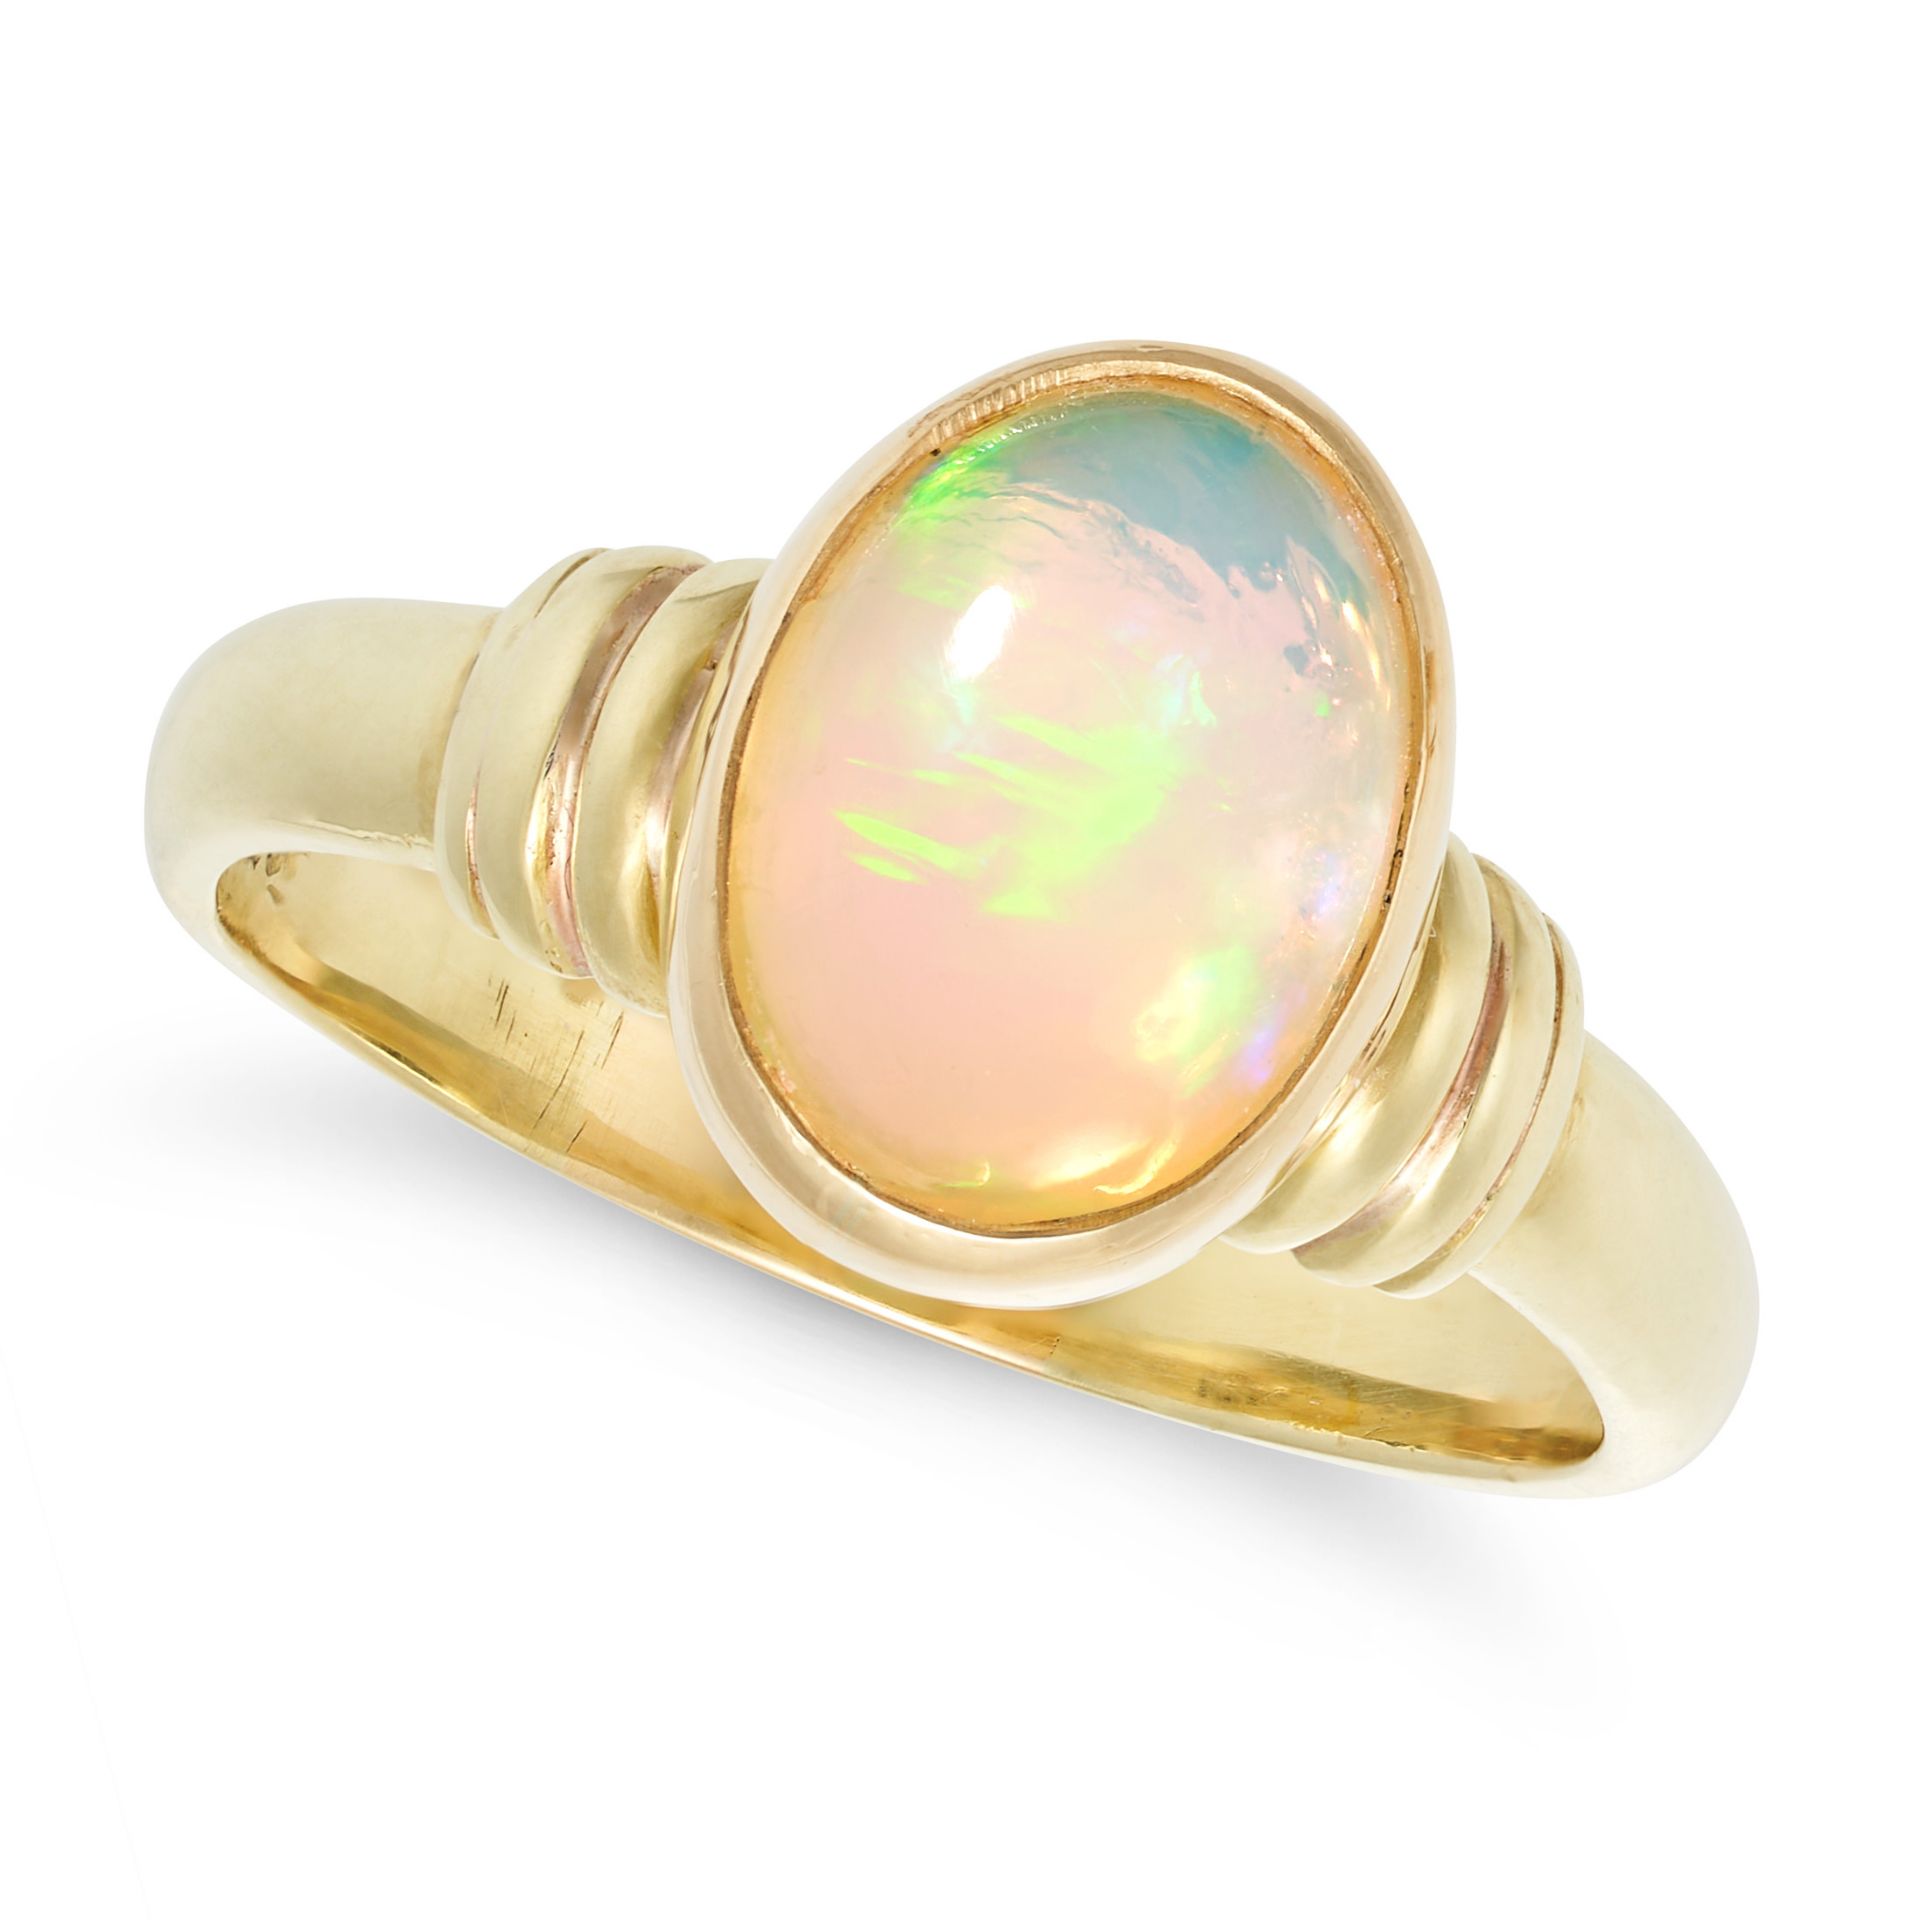 A VINTAGE OPAL RING in 18ct yellow gold, set with a cabochon opal of approximately 3.75 carats, t...